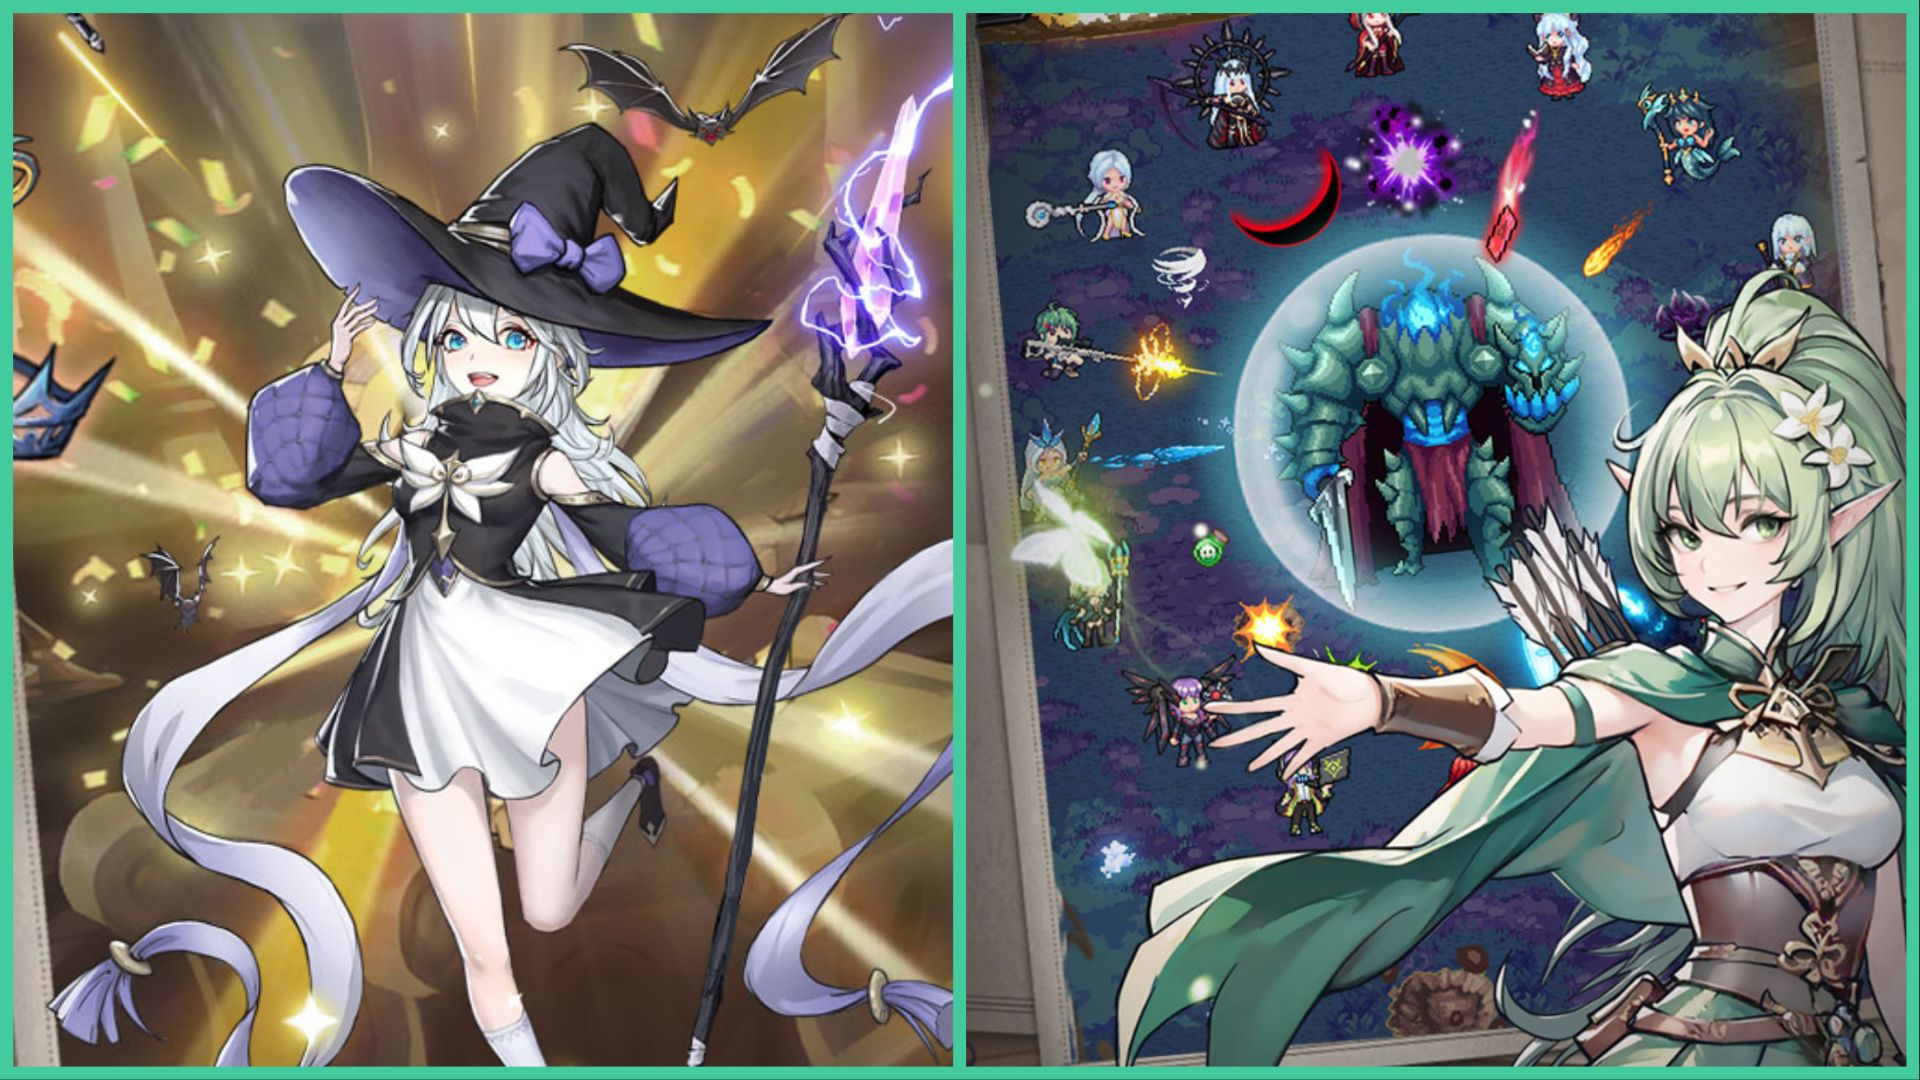 feature image for our witch tower: flash codes, the image features two images from the game, with one being of a witch wearing a witch hat as she holds a staff crackling with electricity, there is also a screenshot from the game of a boss fight as a group of witches circle it and attack, with a drawing of one of the elven characters holding her hand out and smiling with arrows strapped to her back